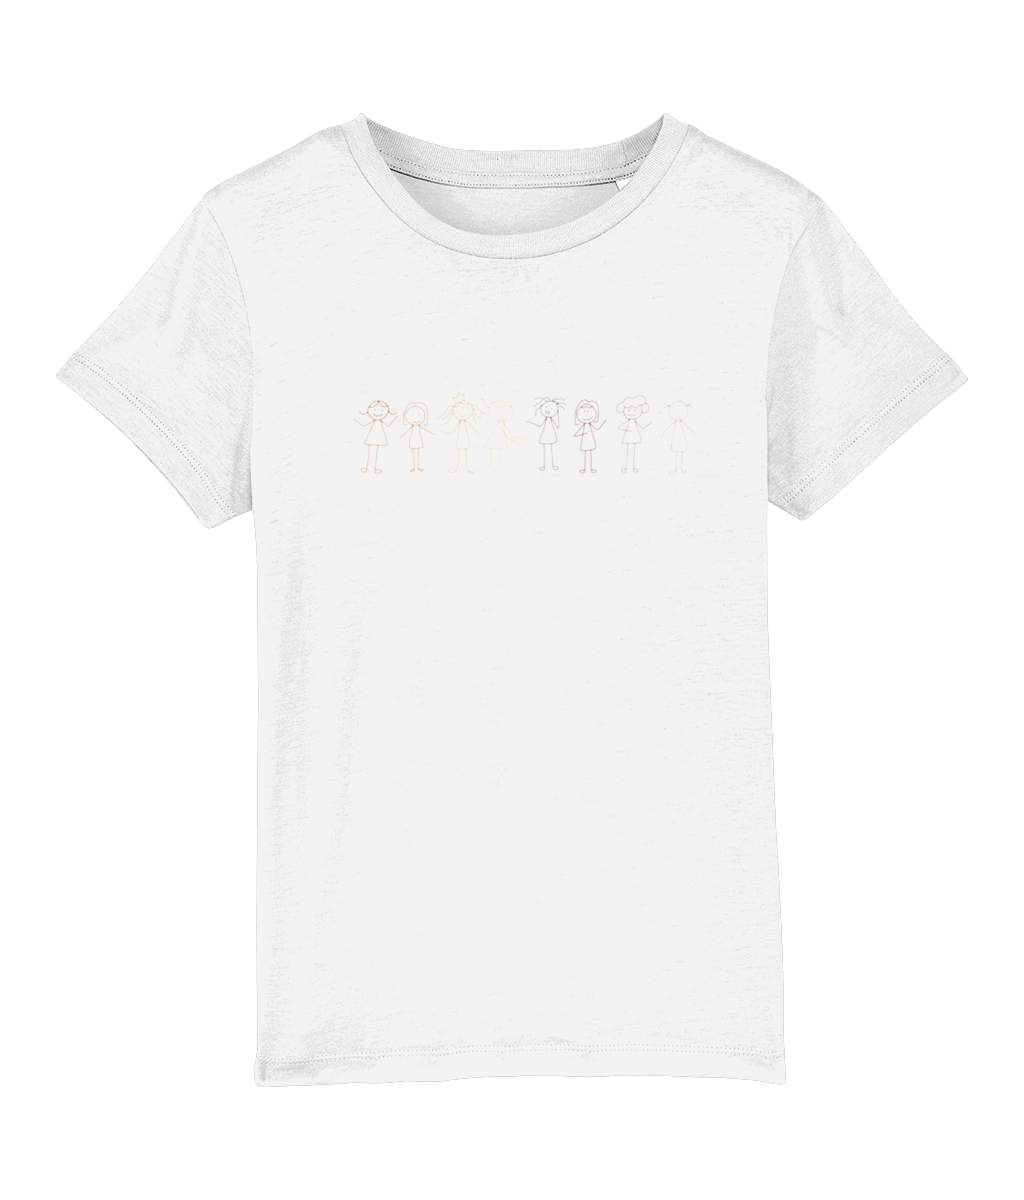 Be Friends Girls Organic Cotton T Shirts - Buy any 3 get 10% off